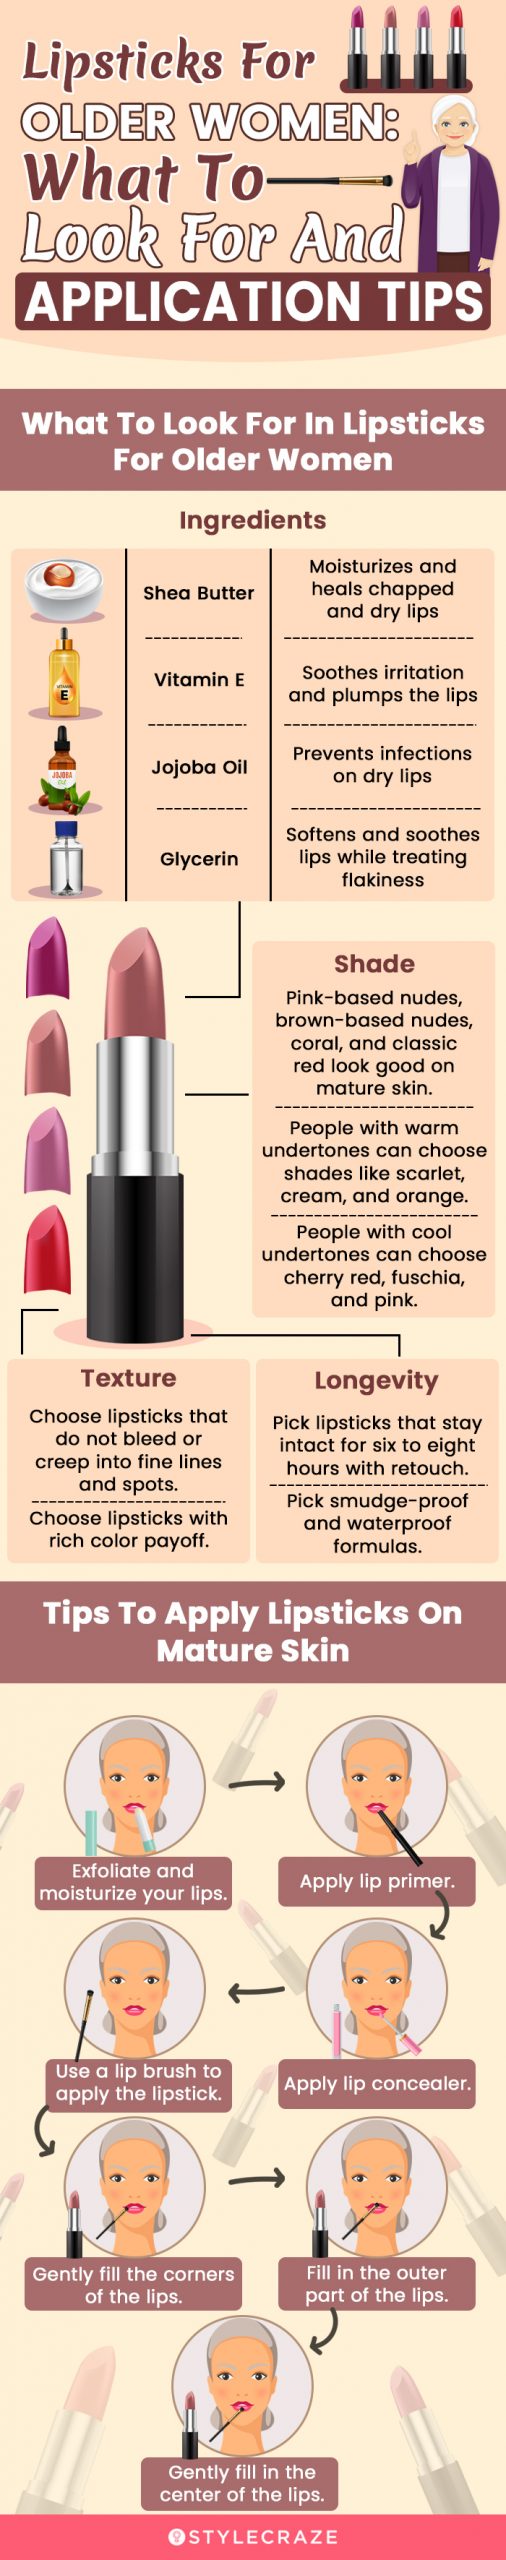 Lipsticks For Older Women: What To Look For & Application Tips (infographic)